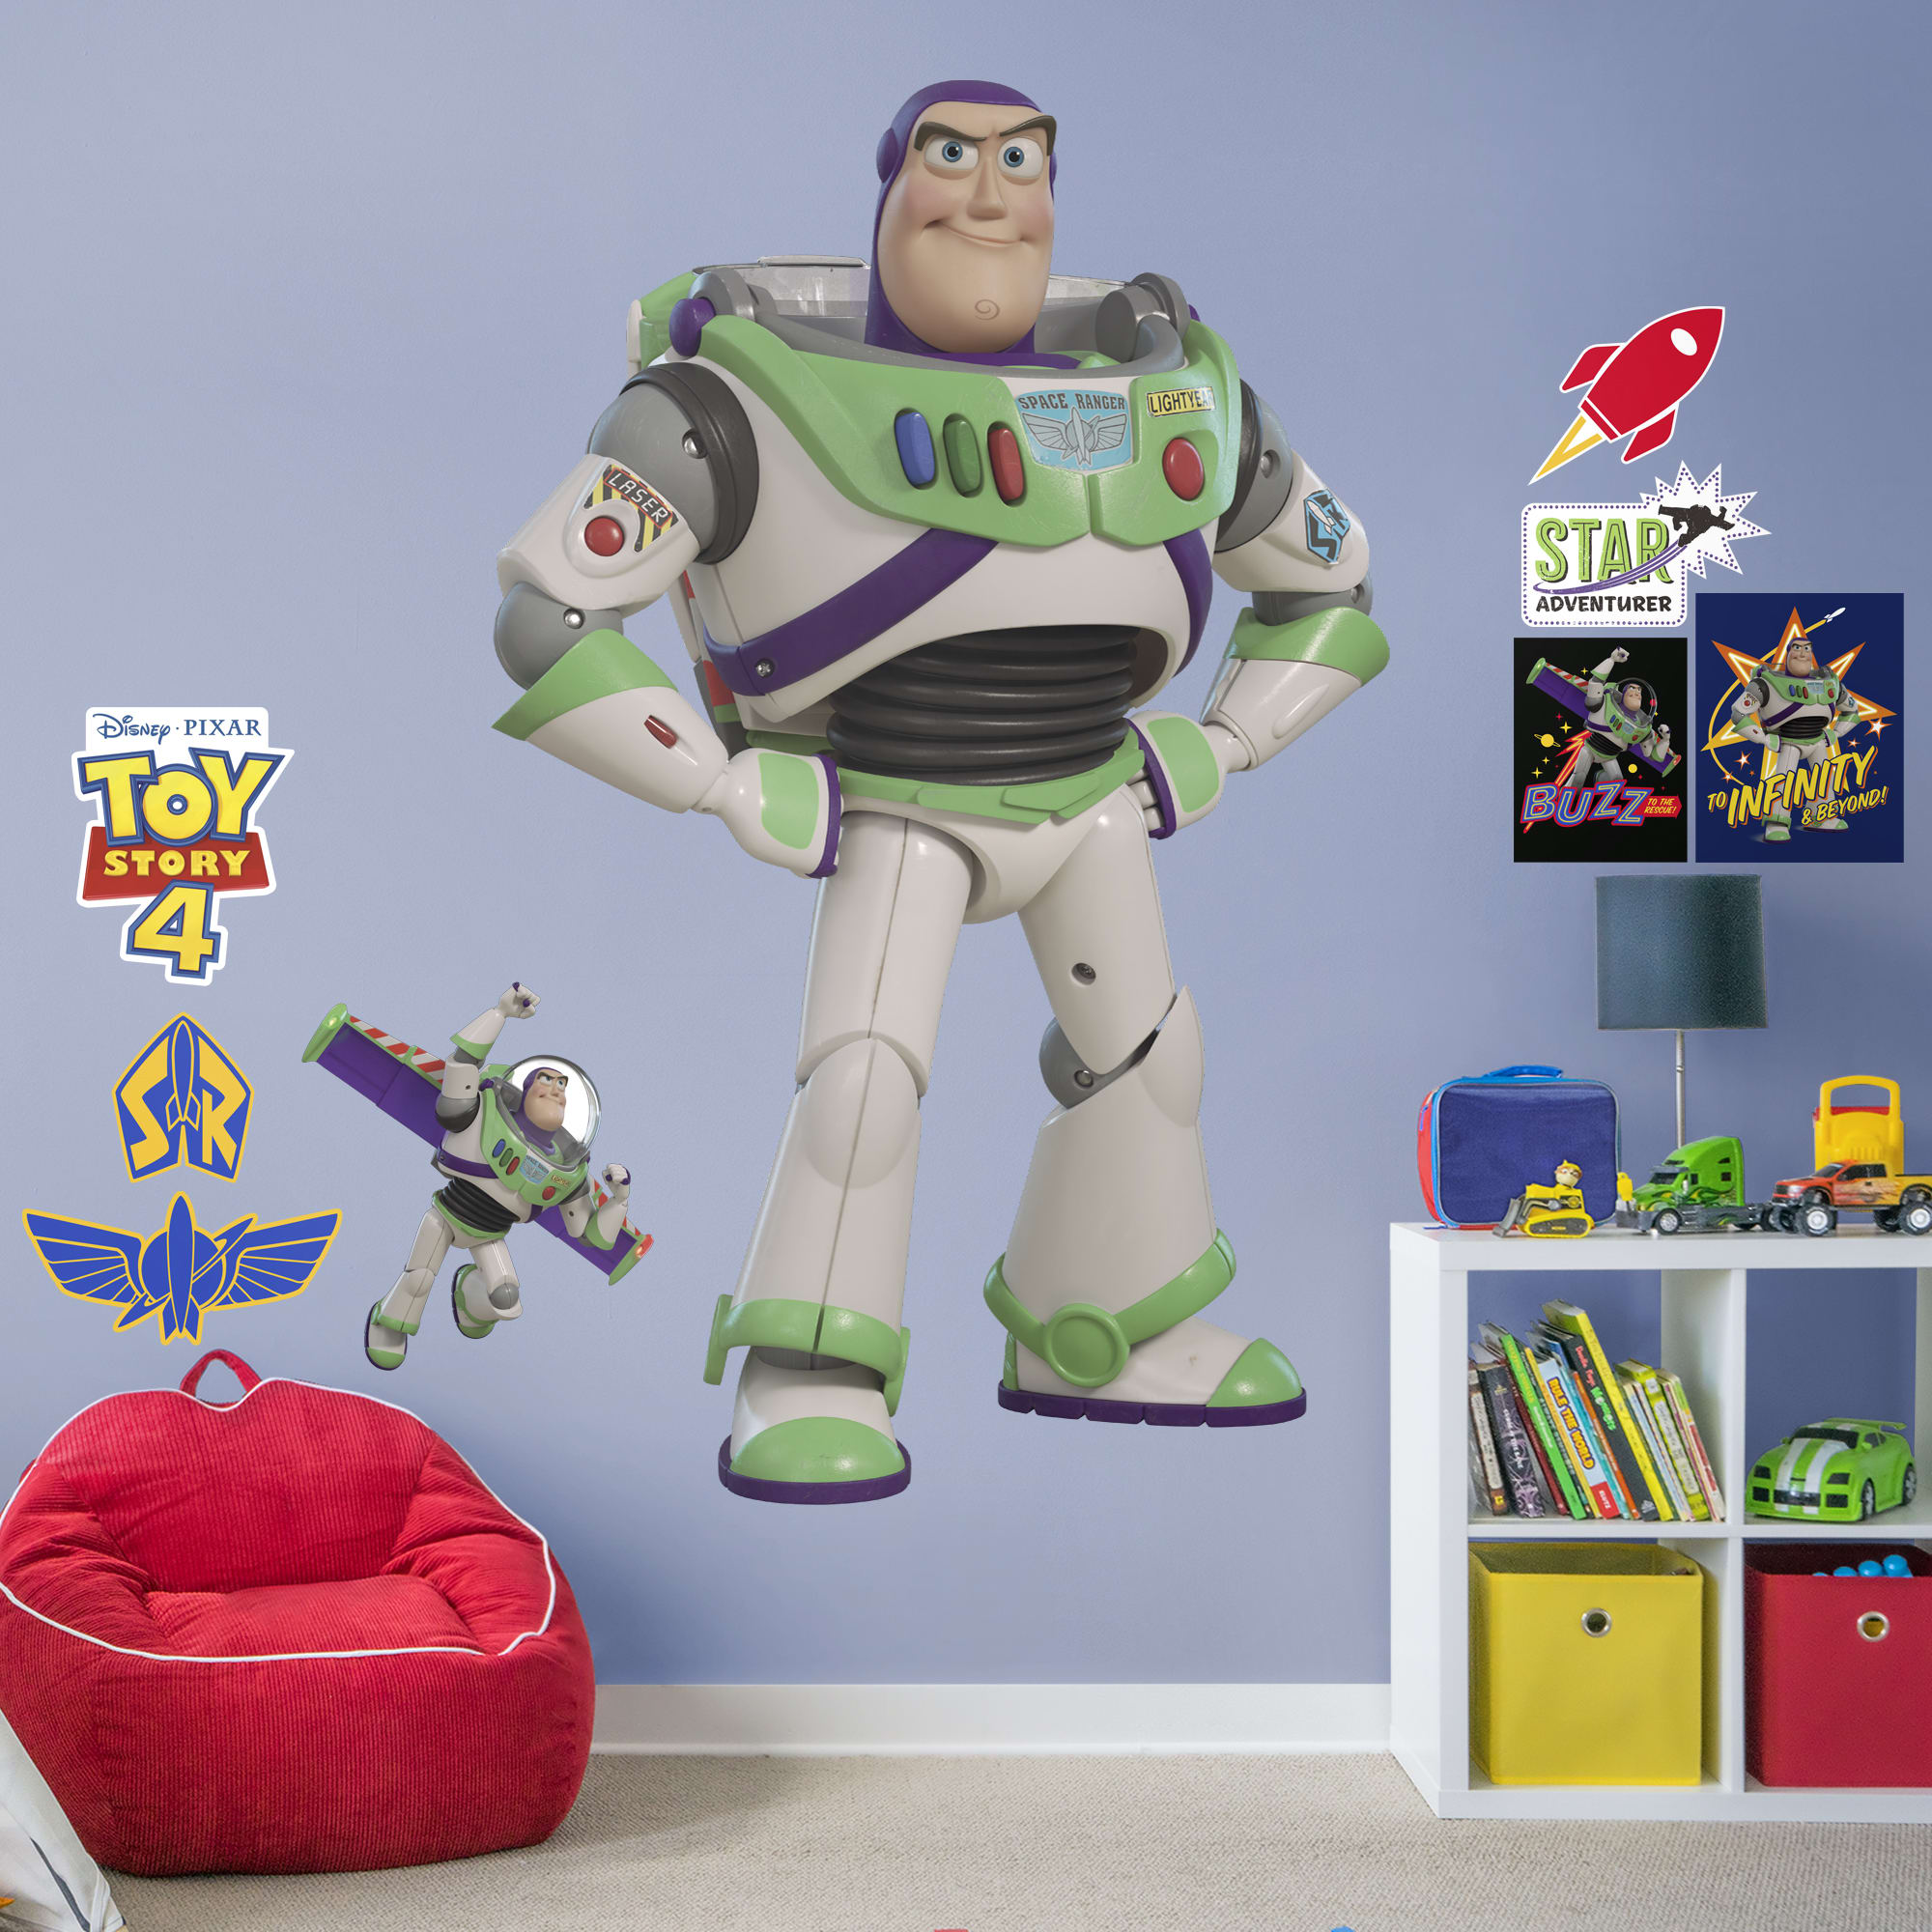 Toy Story 4: Buzz Lightyear - Officially Licensed Disney/PIXAR Removable Wall Decal Huge Character + 9 Decals (49"W x 78"H) by F